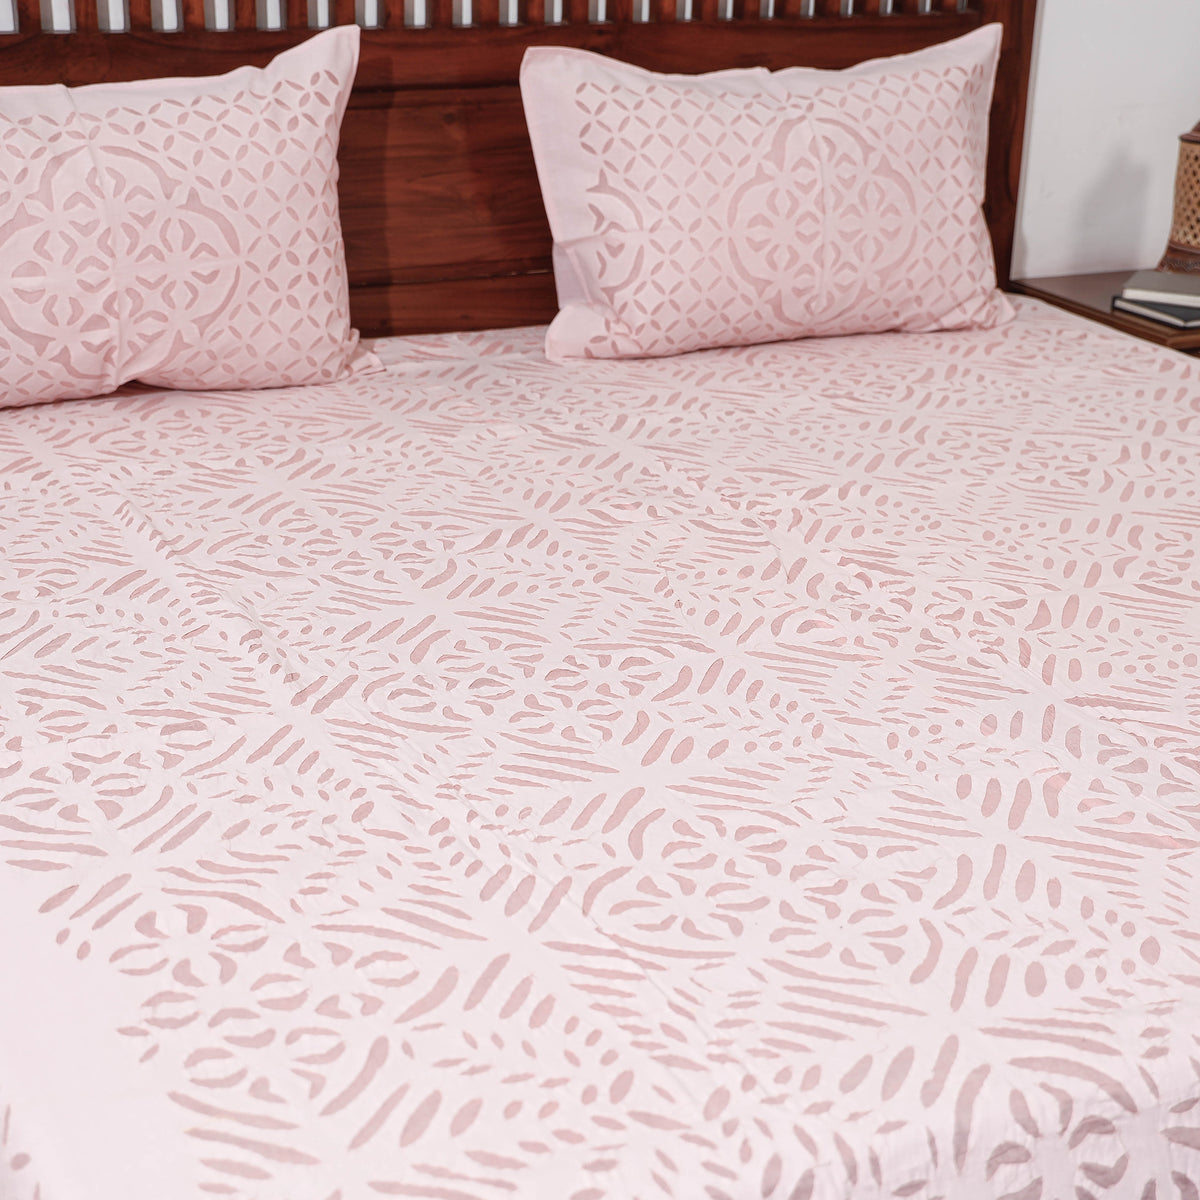 Barmer Applique Cut Work Cotton Double Bed Cover with Pillow Covers (108 x 90 in)